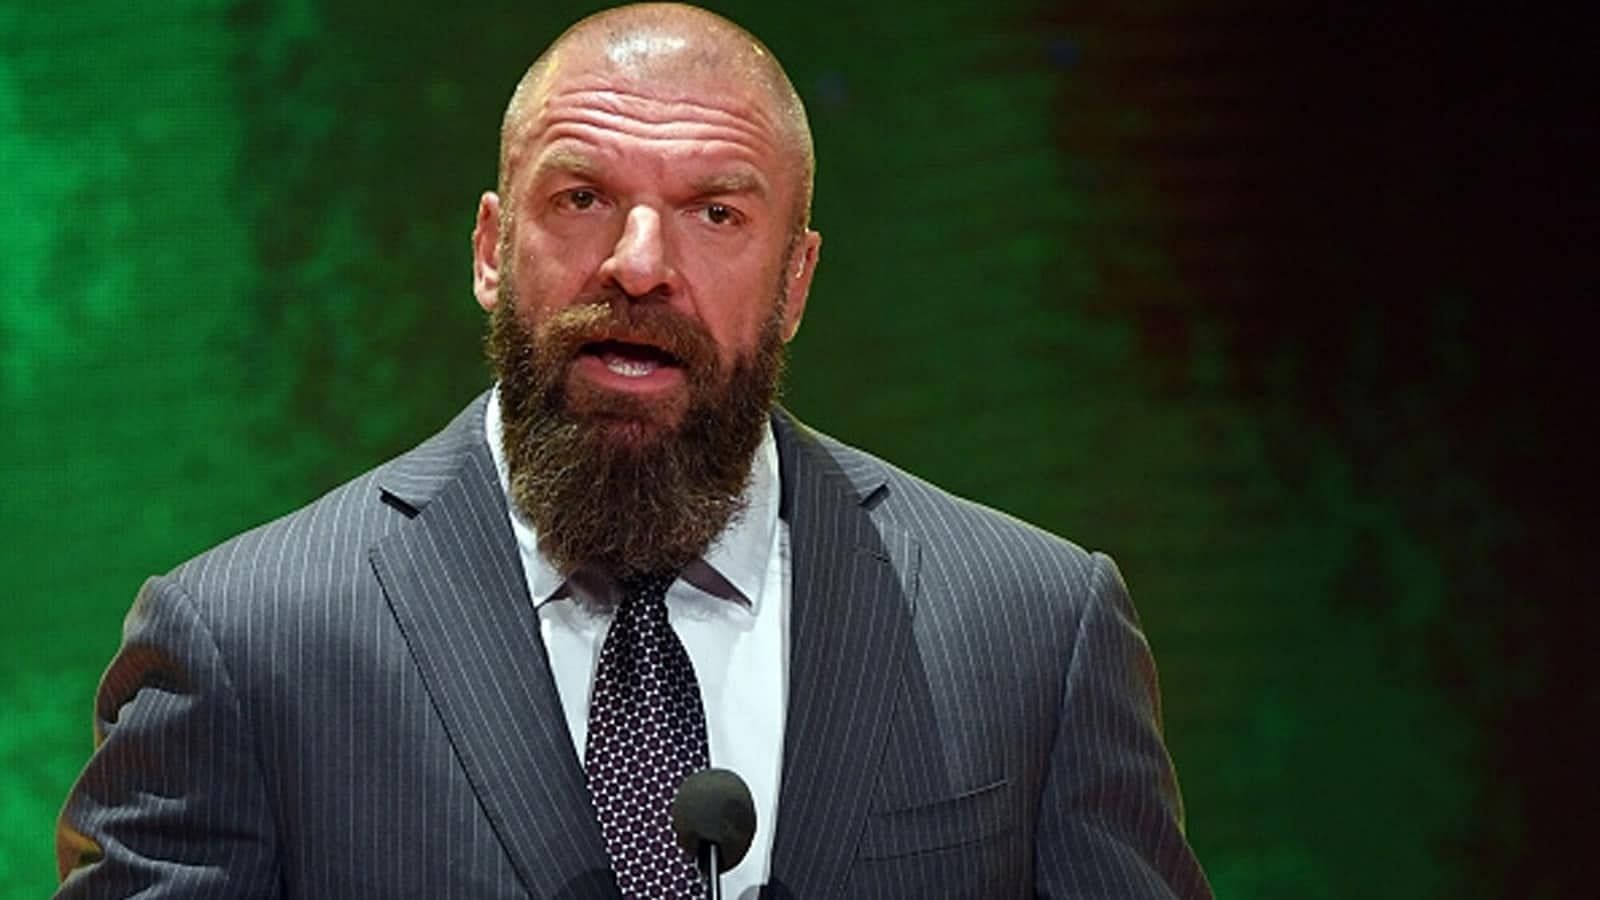 Could Triple H bring back a former WWE star?